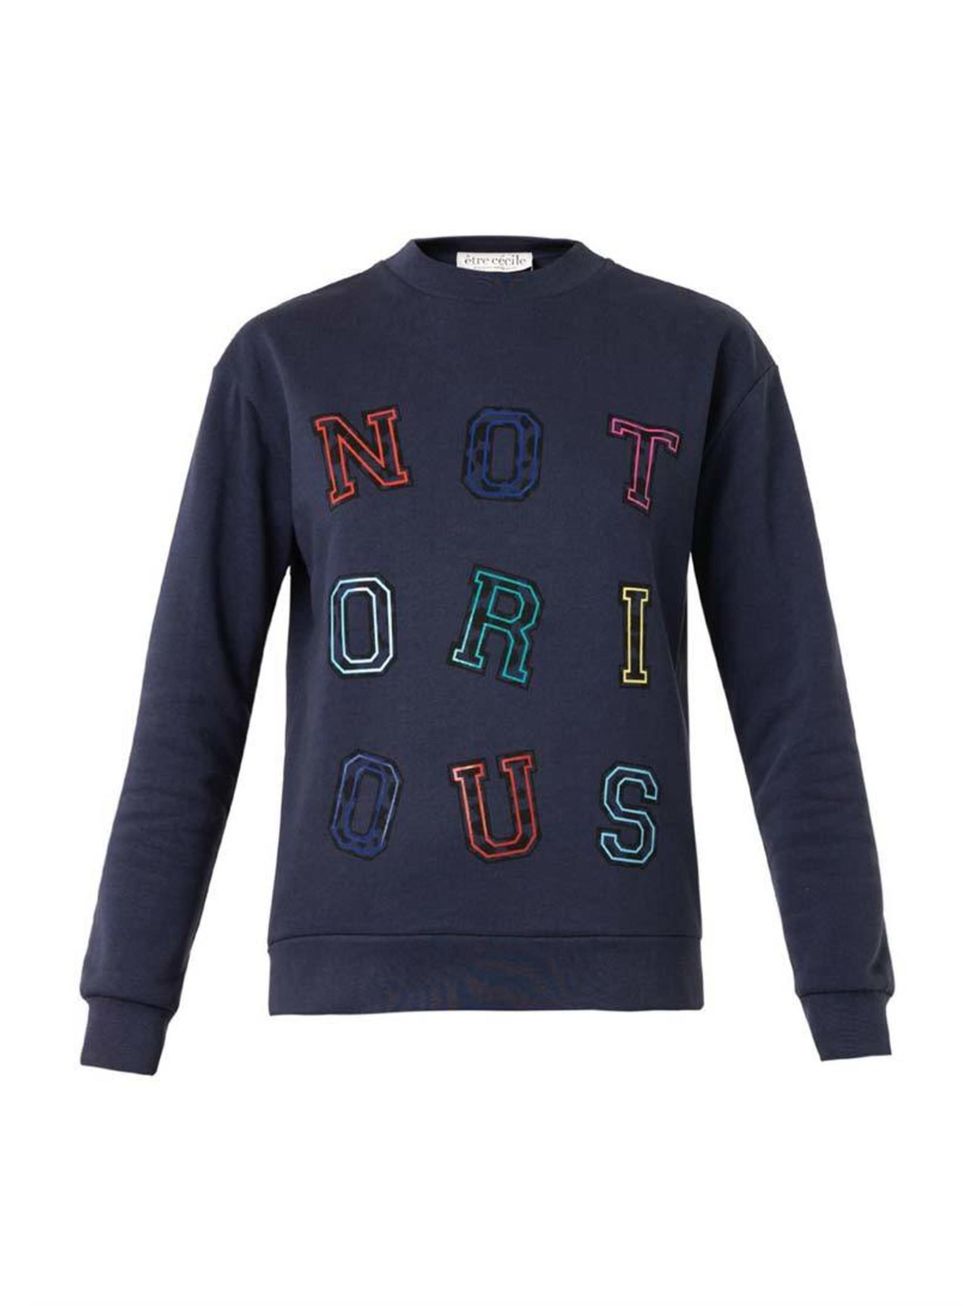 <p>Designer Charlotte Wallace is the latest ELLE staffer to join the 'almost parisien' club...</p>

<p> </p>

<p>Être Cécile sweatshirt, £110 at <a href="http://www.matchesfashion.com/product/197335" target="_blank">MatchesFashion.com</a></p>